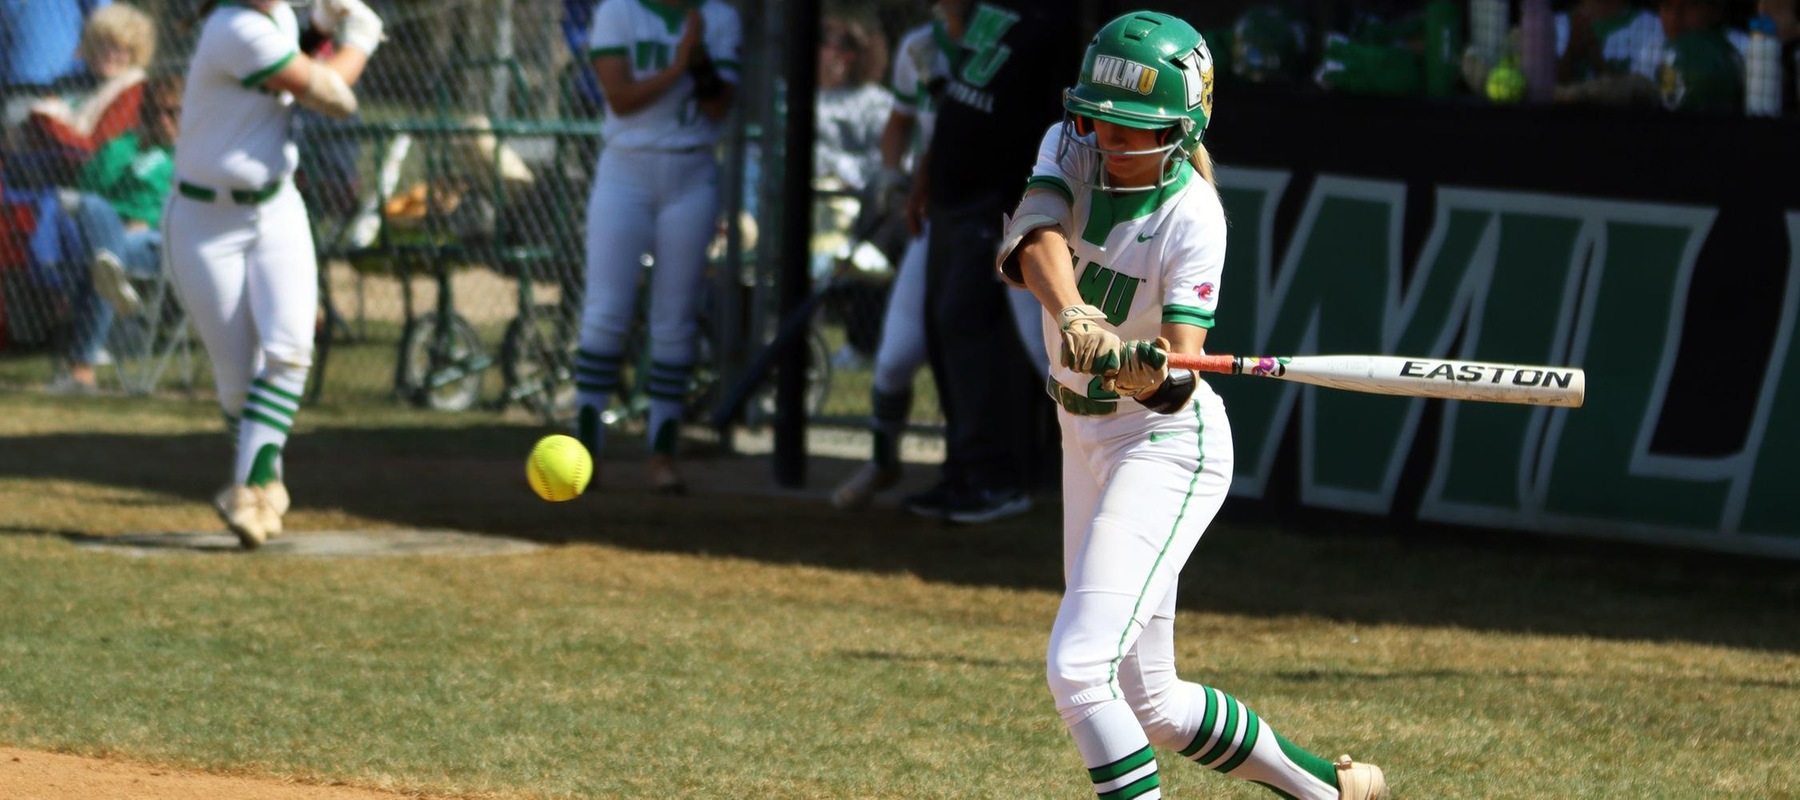 Lexi Moore went 5-for-8 with a homer, 4 RBI, and 3 runs scored in the doubleheader at Post. Copyright 2023; Wilmington University. All rights reserved. Photo by Dan Lauletta. March 22, 2023 vs. West Chester.